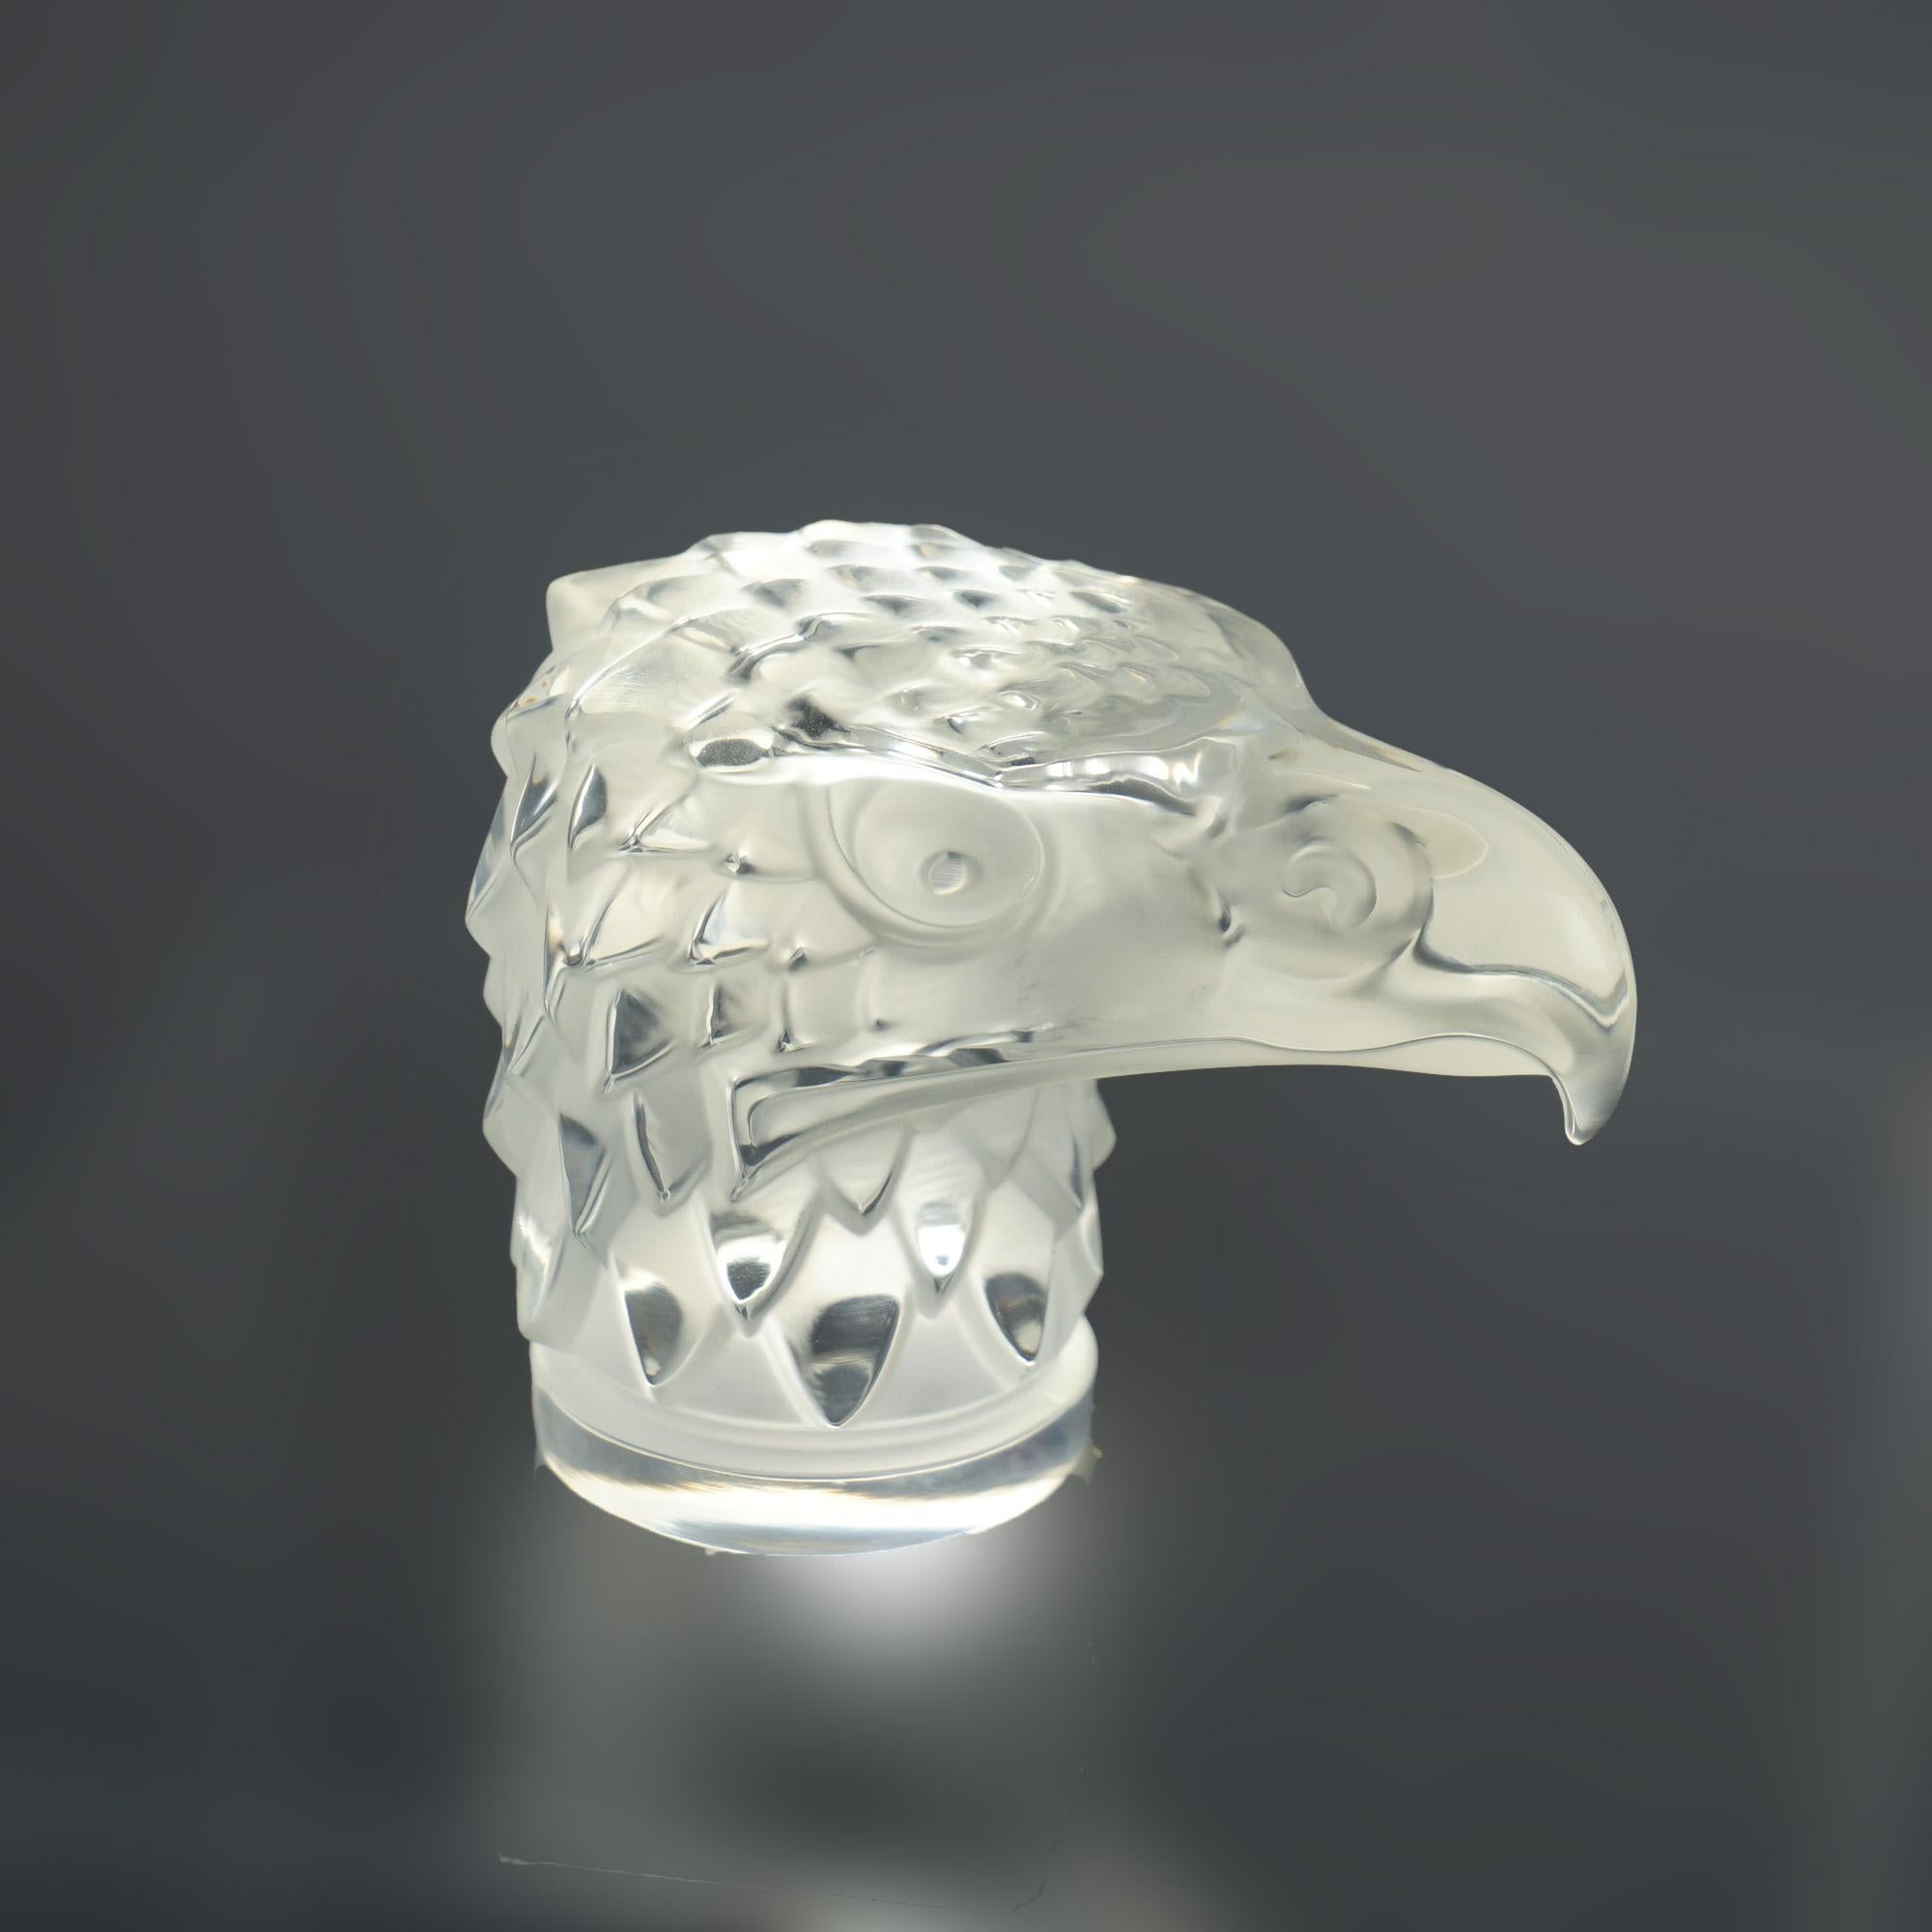 French Lalique Crystal Glass Figural Eagle Head Paperweight, Signed, 20thC

Measures - 4.75